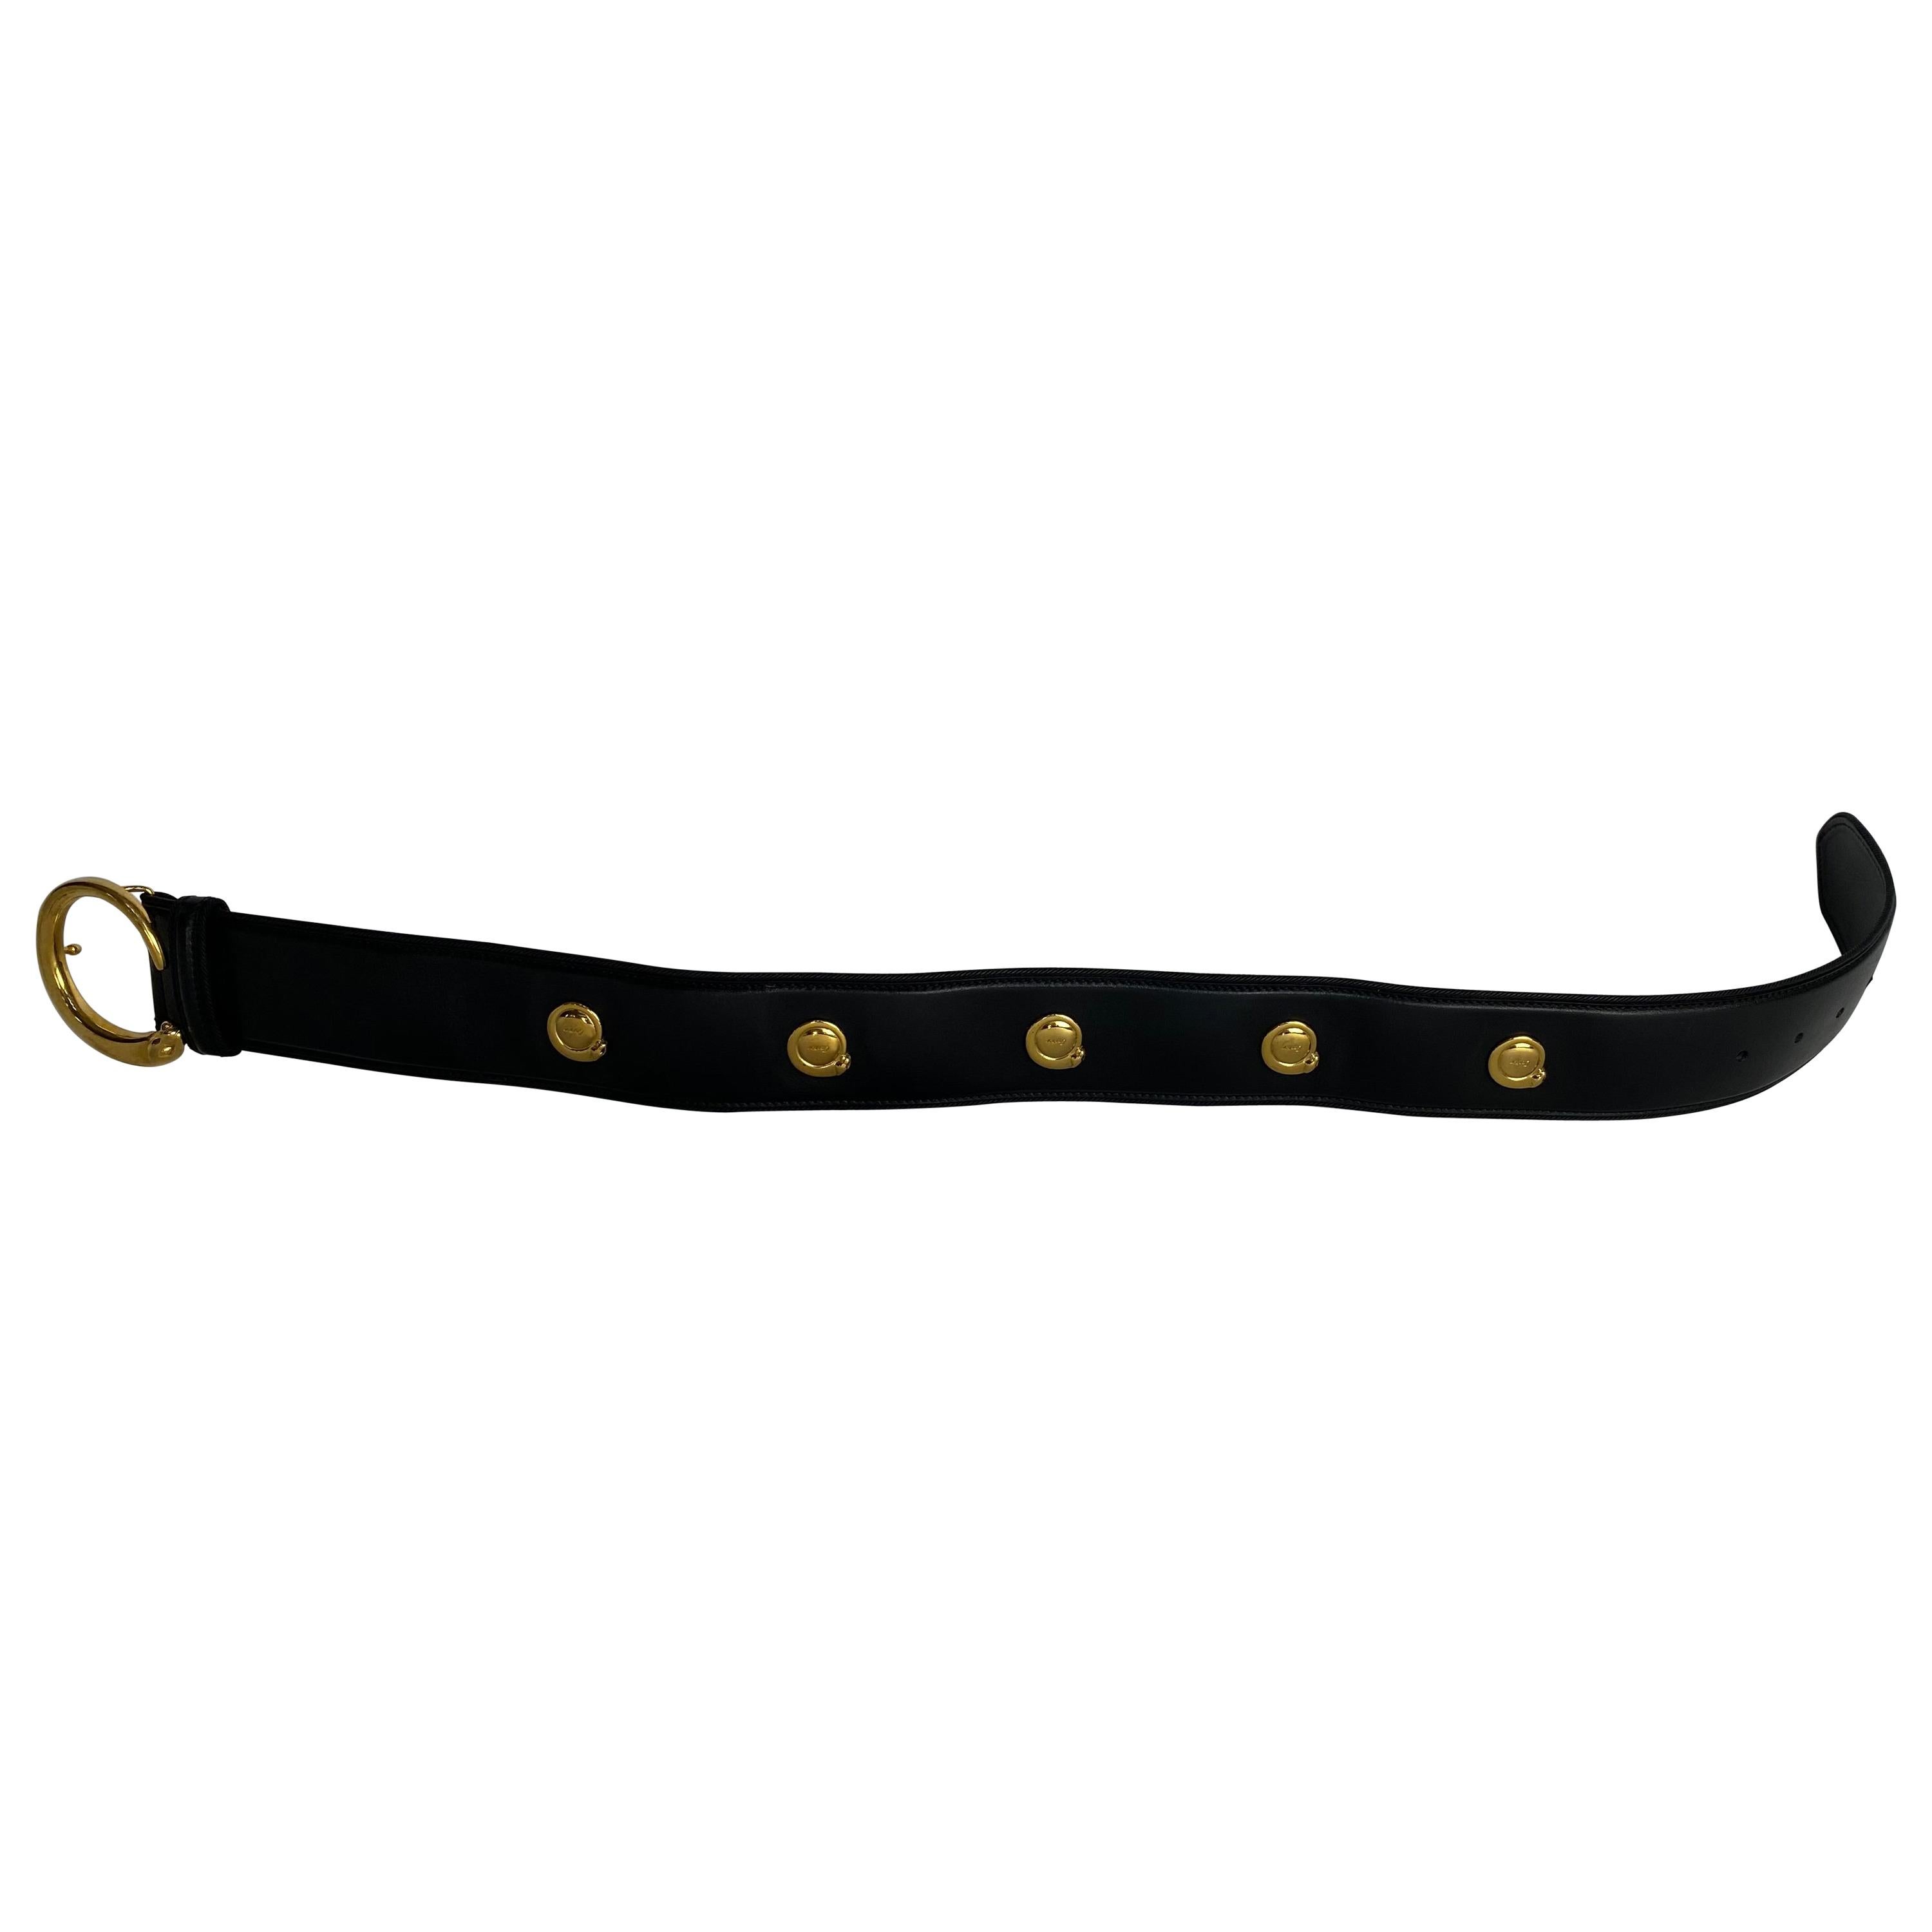 A gold buckle black Cartier belt with 5 small golden jaguar buttons, every buttons with Cartier marker, the gold jaguar buckle with Cartier 1930 marker too, size small. The belt is made of a black leather in the outside and black leather on the